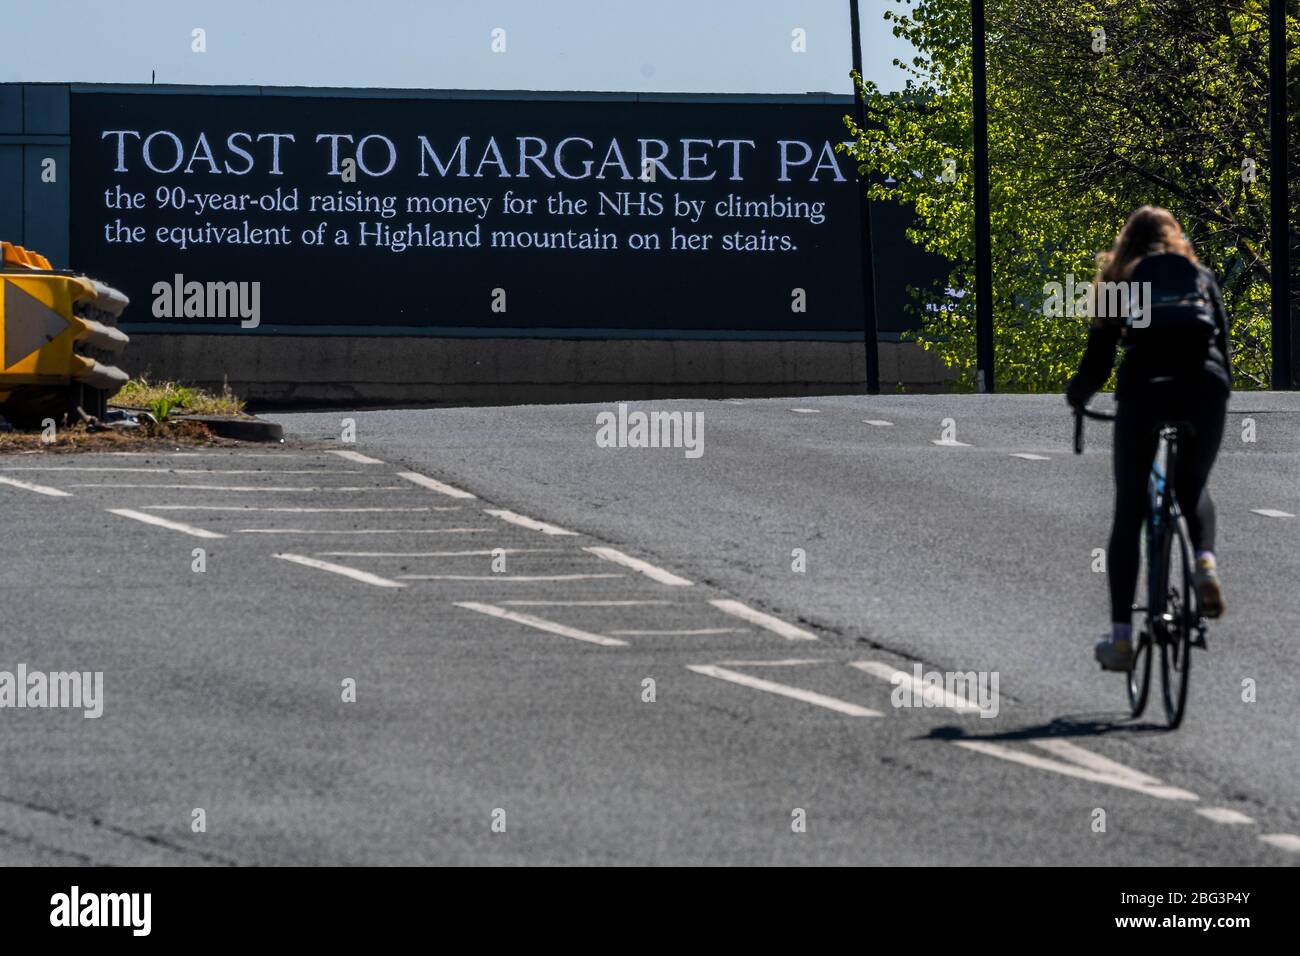 London, UK. 20th Apr, 2020. An advertising hoarding raises a toast to Margaret payne, a 90 year old raising money for teh NHS by 'climbing' a scottish mountain on her stairs at home. Credit: Guy Bell/Alamy Live News Stock Photo